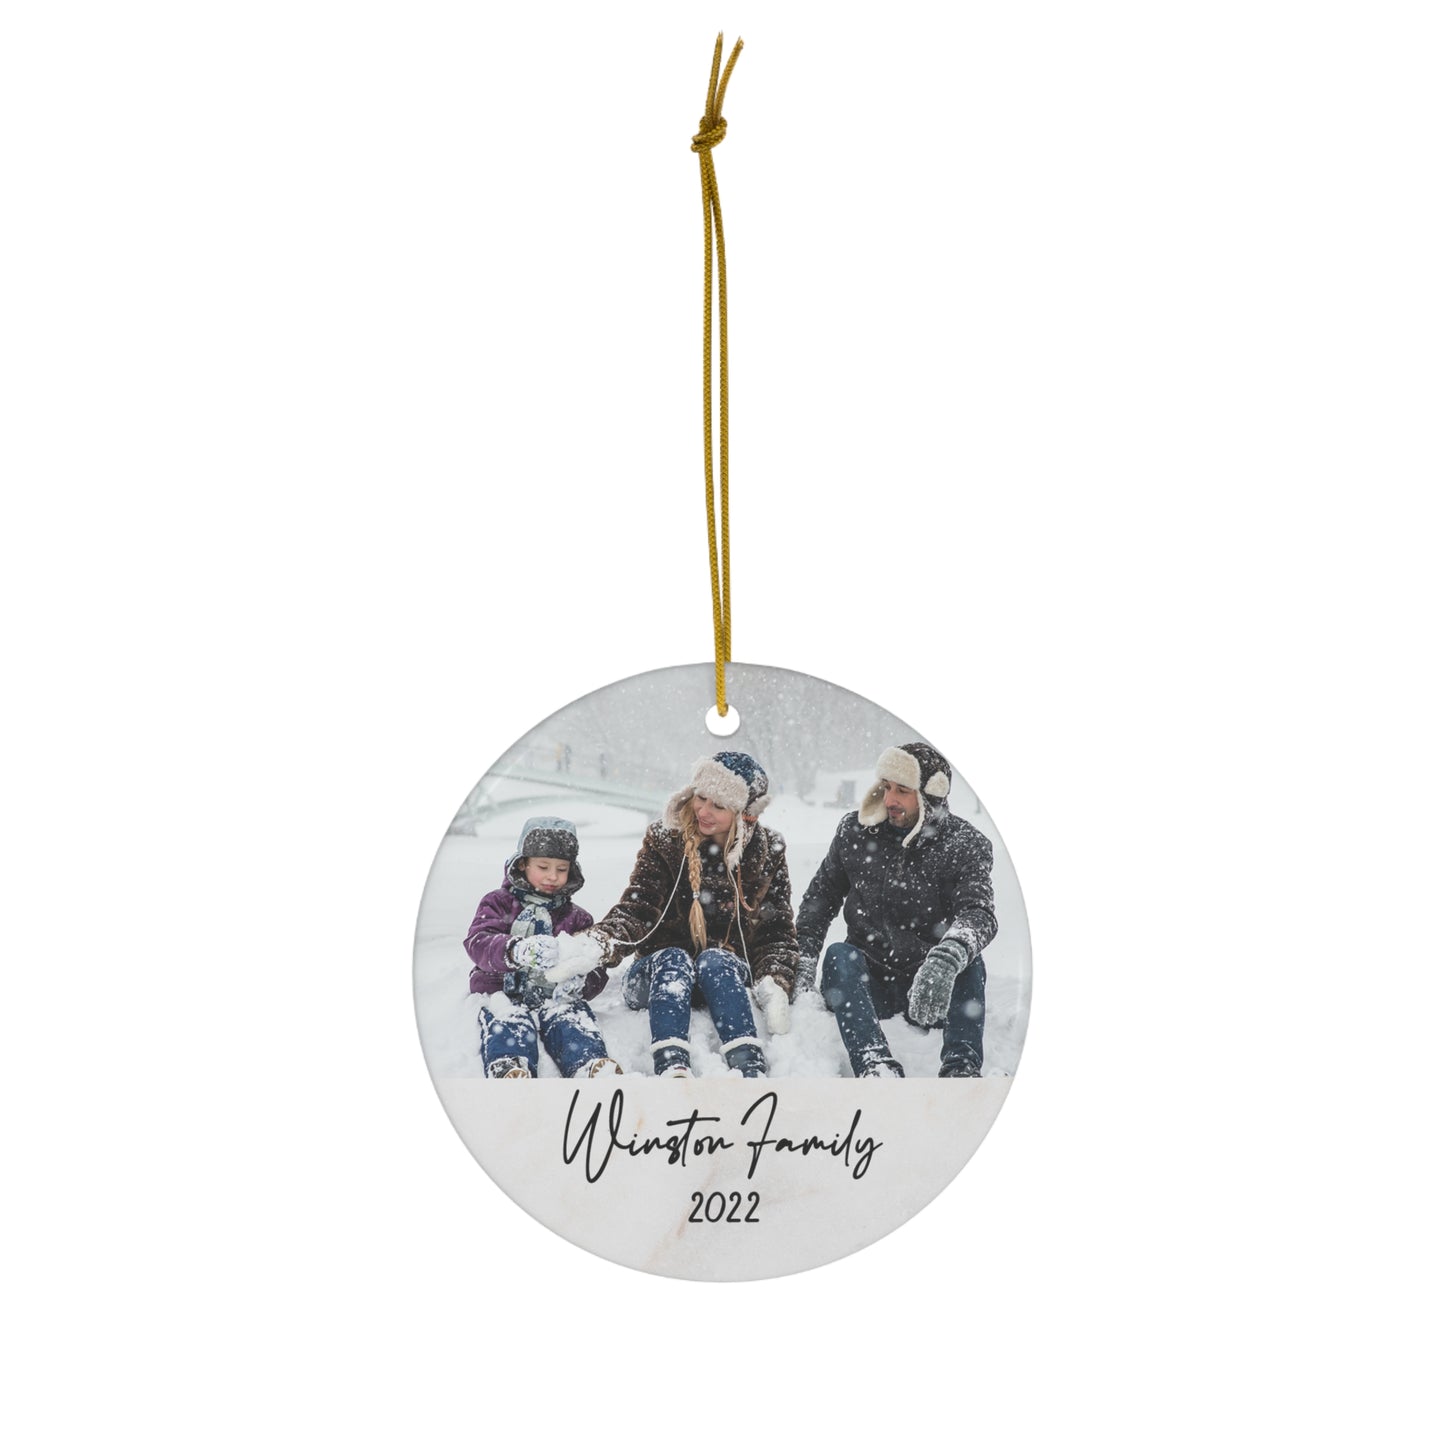 Personalized Photo Christmas Ornament, Christmas Gift, Custom Christmas Family Picture Ornament, In Memory Ornament, Christmas Ceramic Unique Ornament